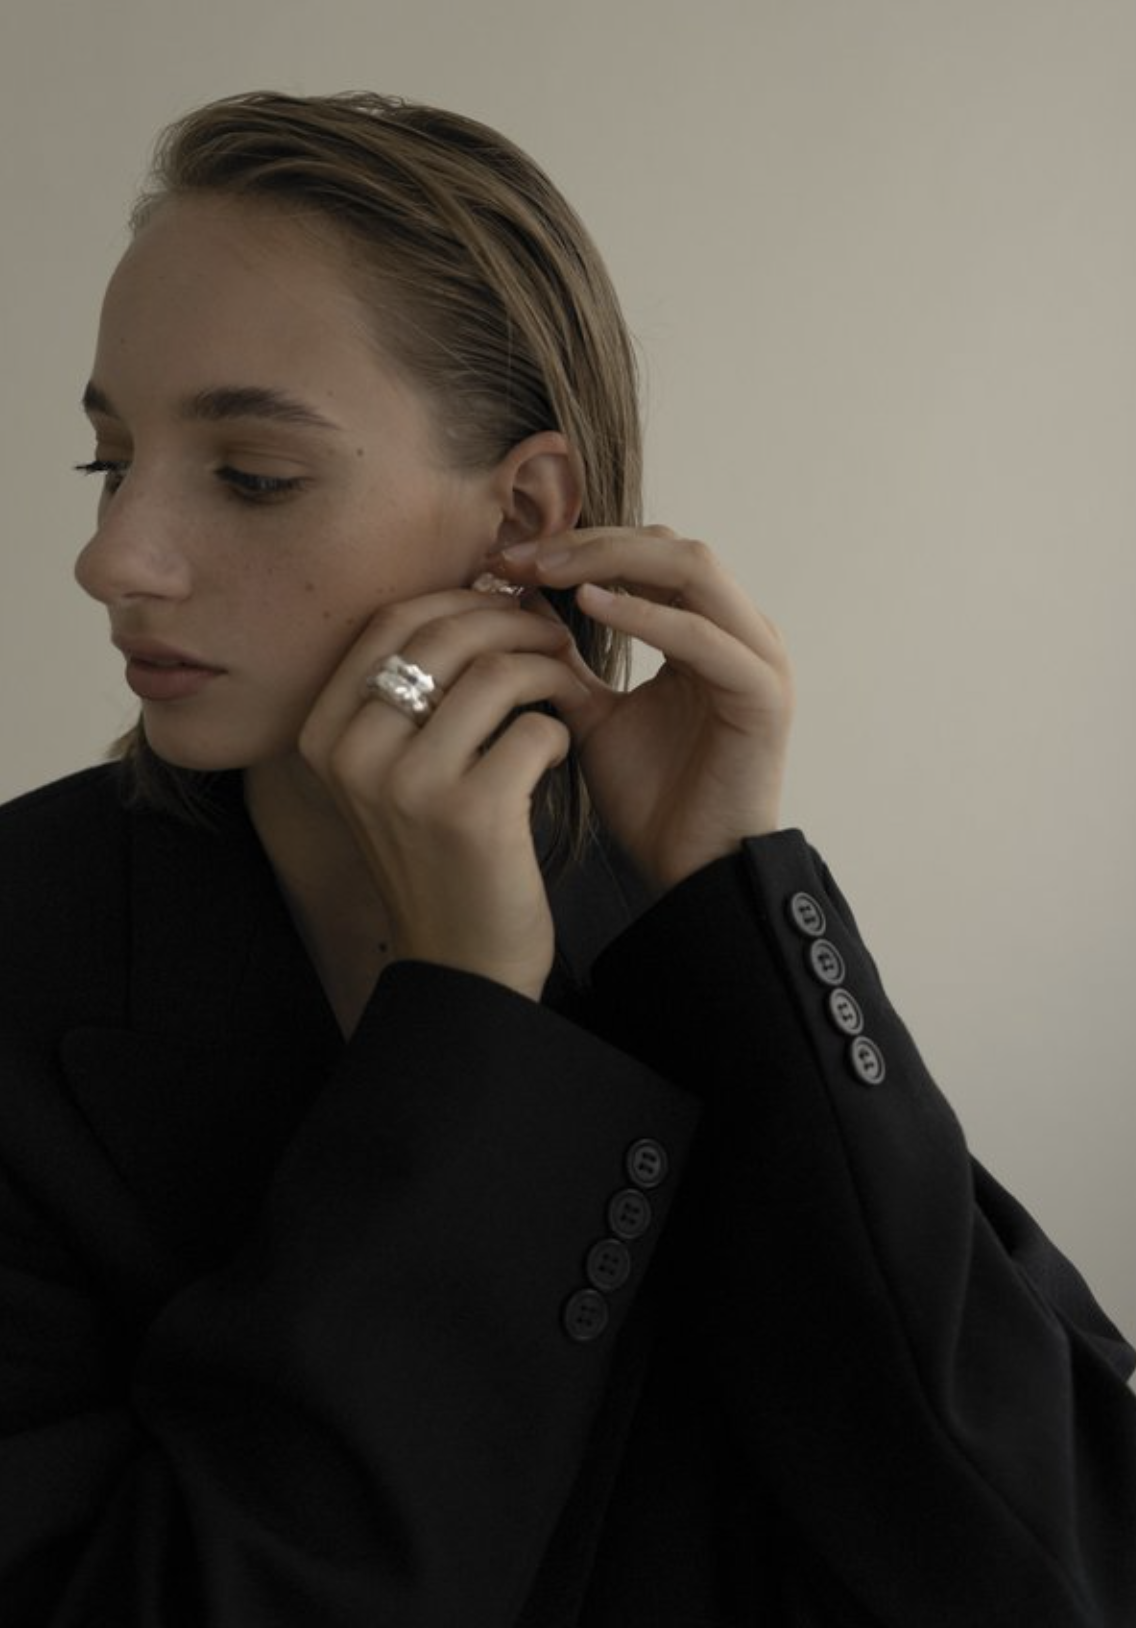 6 Jewelry Trends Destined to Rock the New Year – JCK